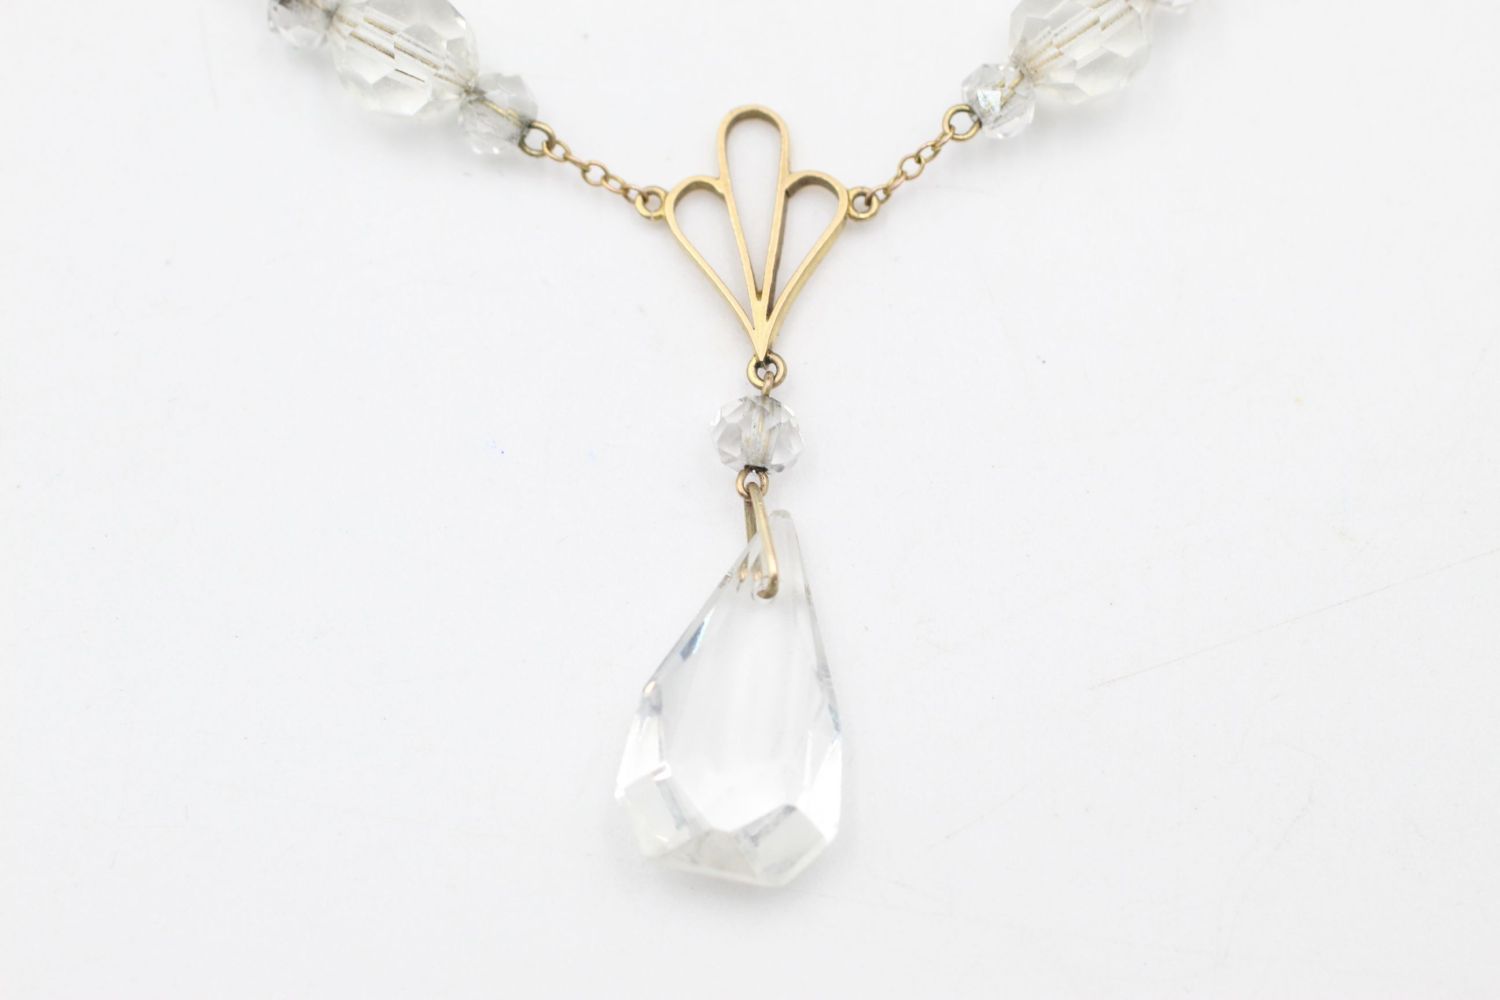 antique 9ct gold cut crystal drop necklace 5.5 grams gross - Image 3 of 5